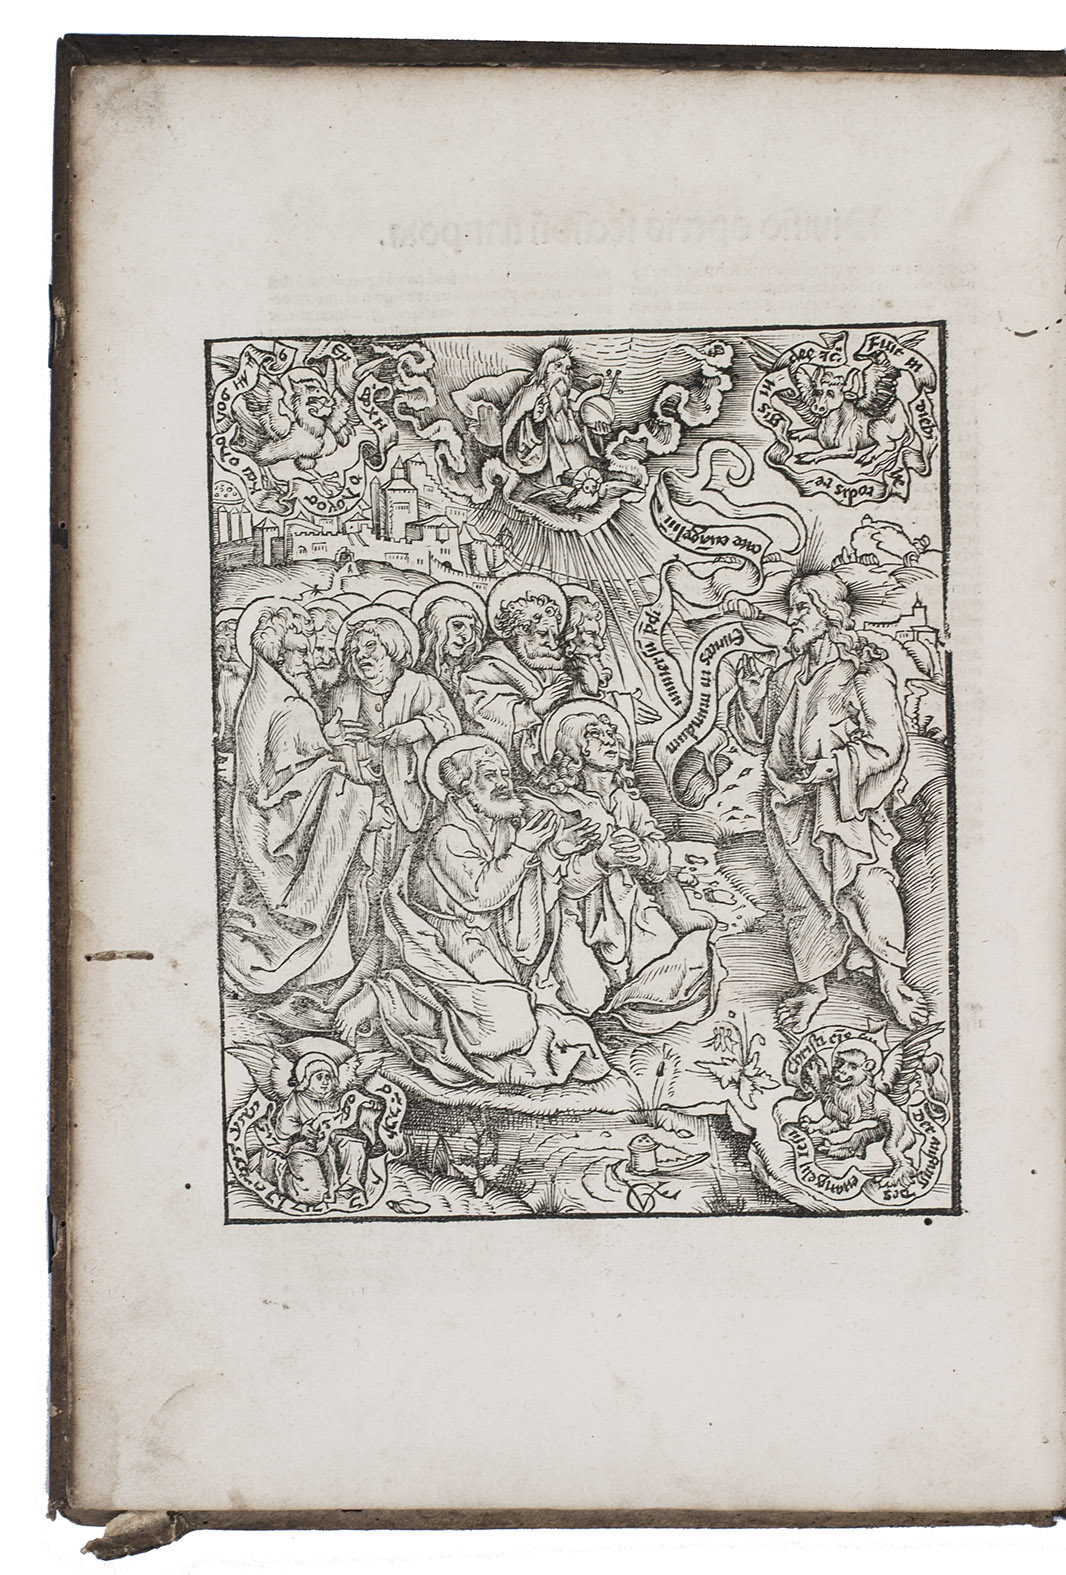 PETRUS DE NATALIBUS. - Catalogus sanctorum & gestorum eorum ex diversis voluminibus collectus: ... (Colophon: Strasbourg, printed by Martin Flach, 1513). Folio (22.2 x 32 cm). Title-page with a woodcut decorated initial and a 4-piece woodcut border by Hans Wechtlin, 1 full-page woodcut by Urs Graf, hundreds of woodcut decorated uncial initials. Set mostly in rotunda gothic types. Contemporary blind-tooled pigskin over wooden boards, in a panel design, with 2 brass clasps on leather straps with brass catchplates and anchorplates.